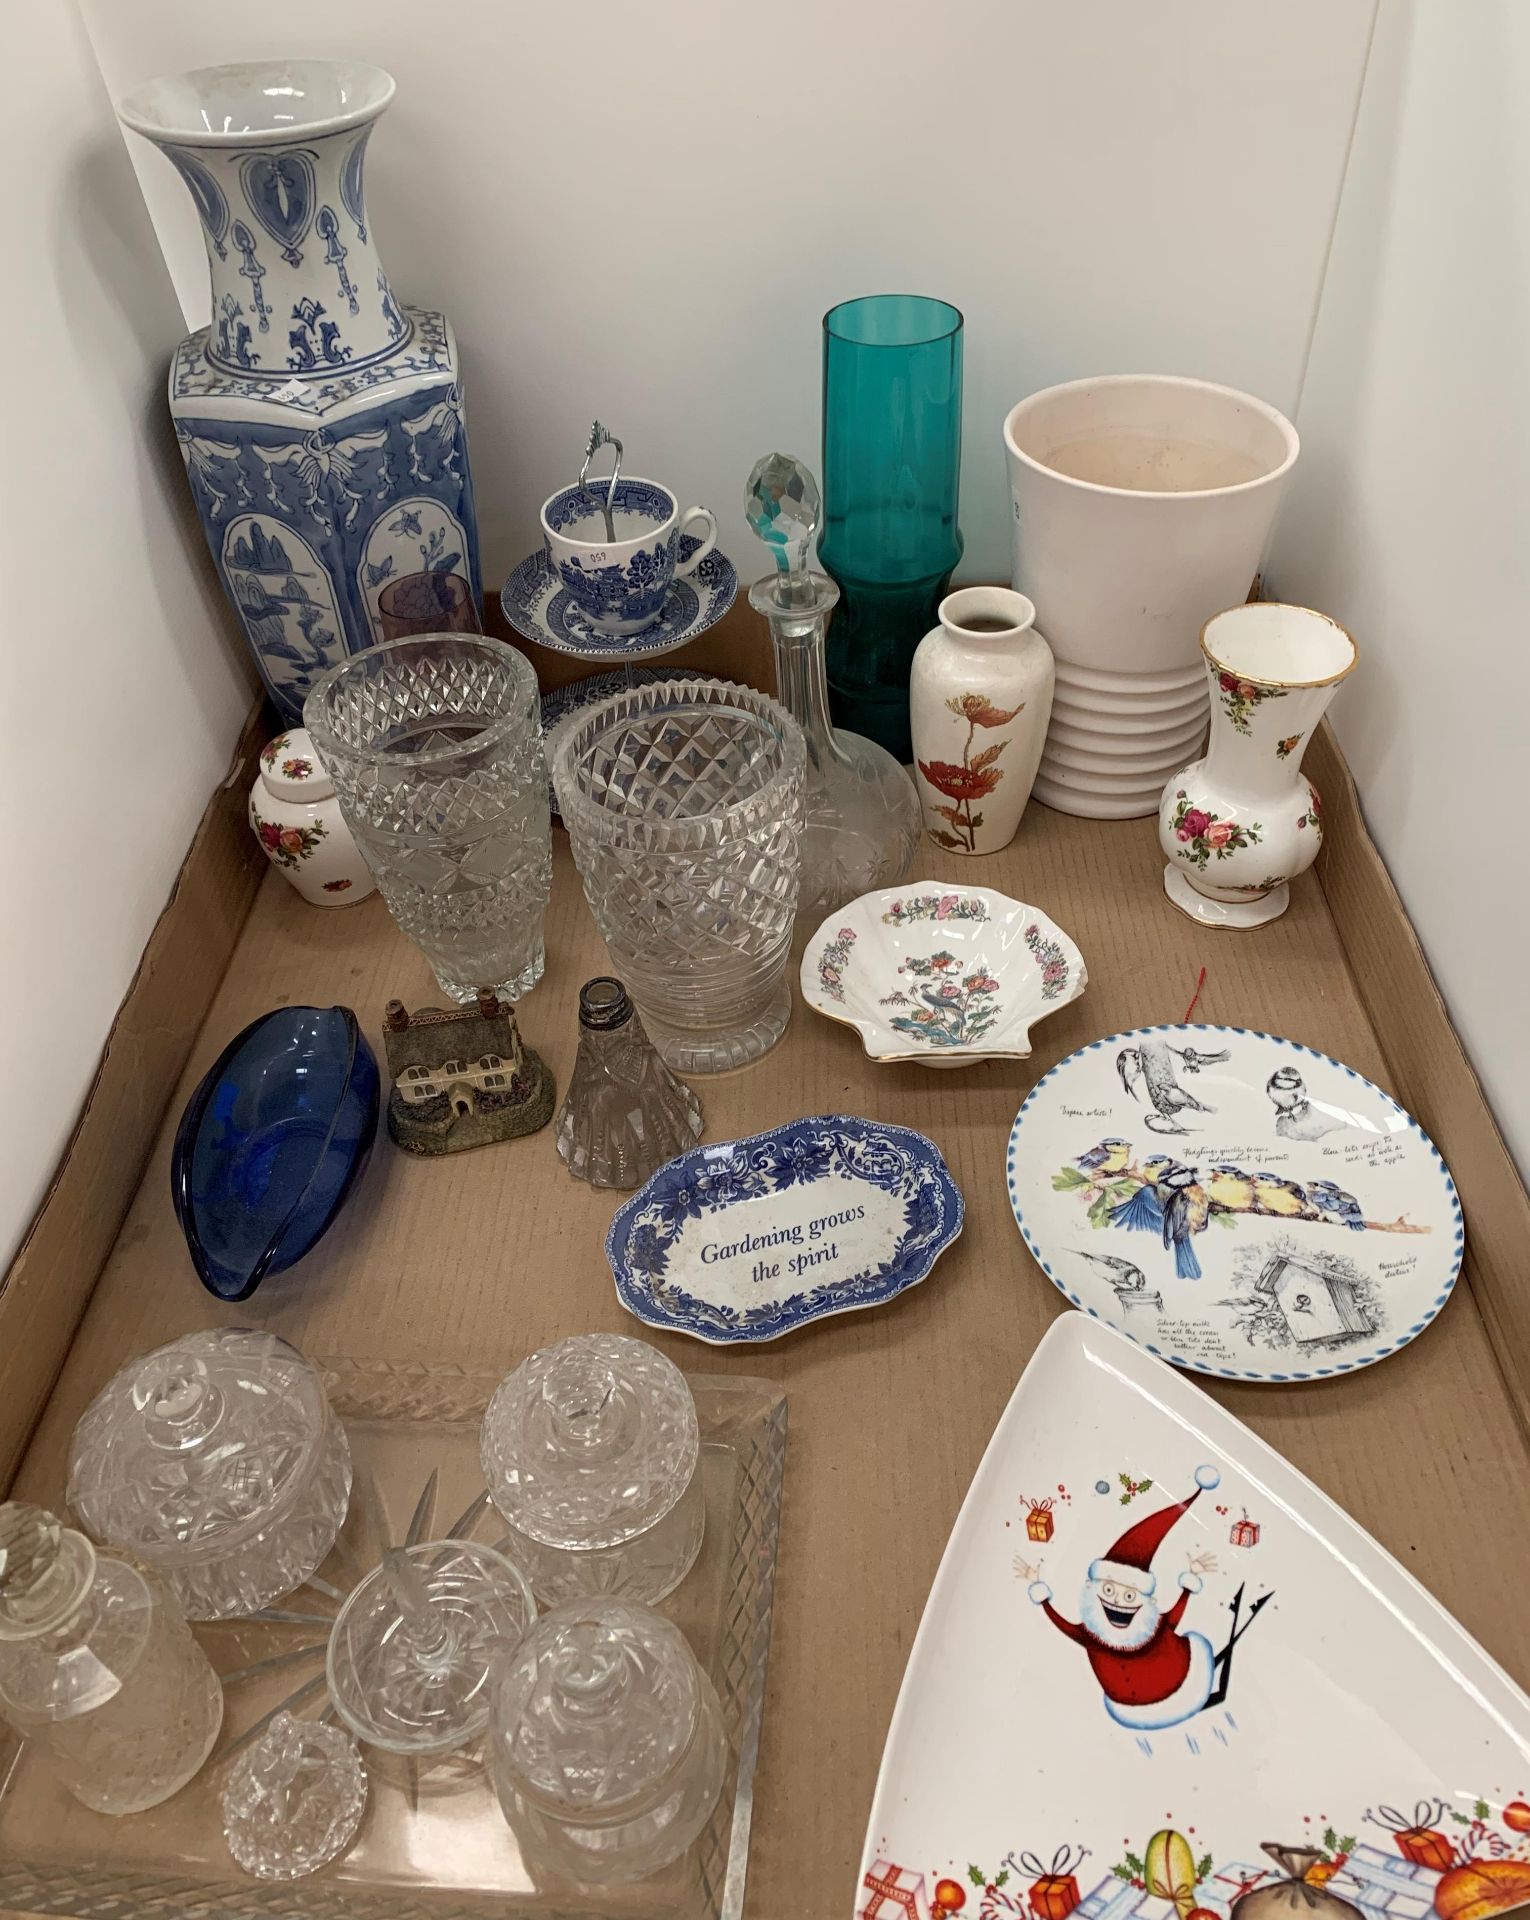 Contents to tray - Wedgwood plate, Spode memento plate, glasses, vases, decanters,